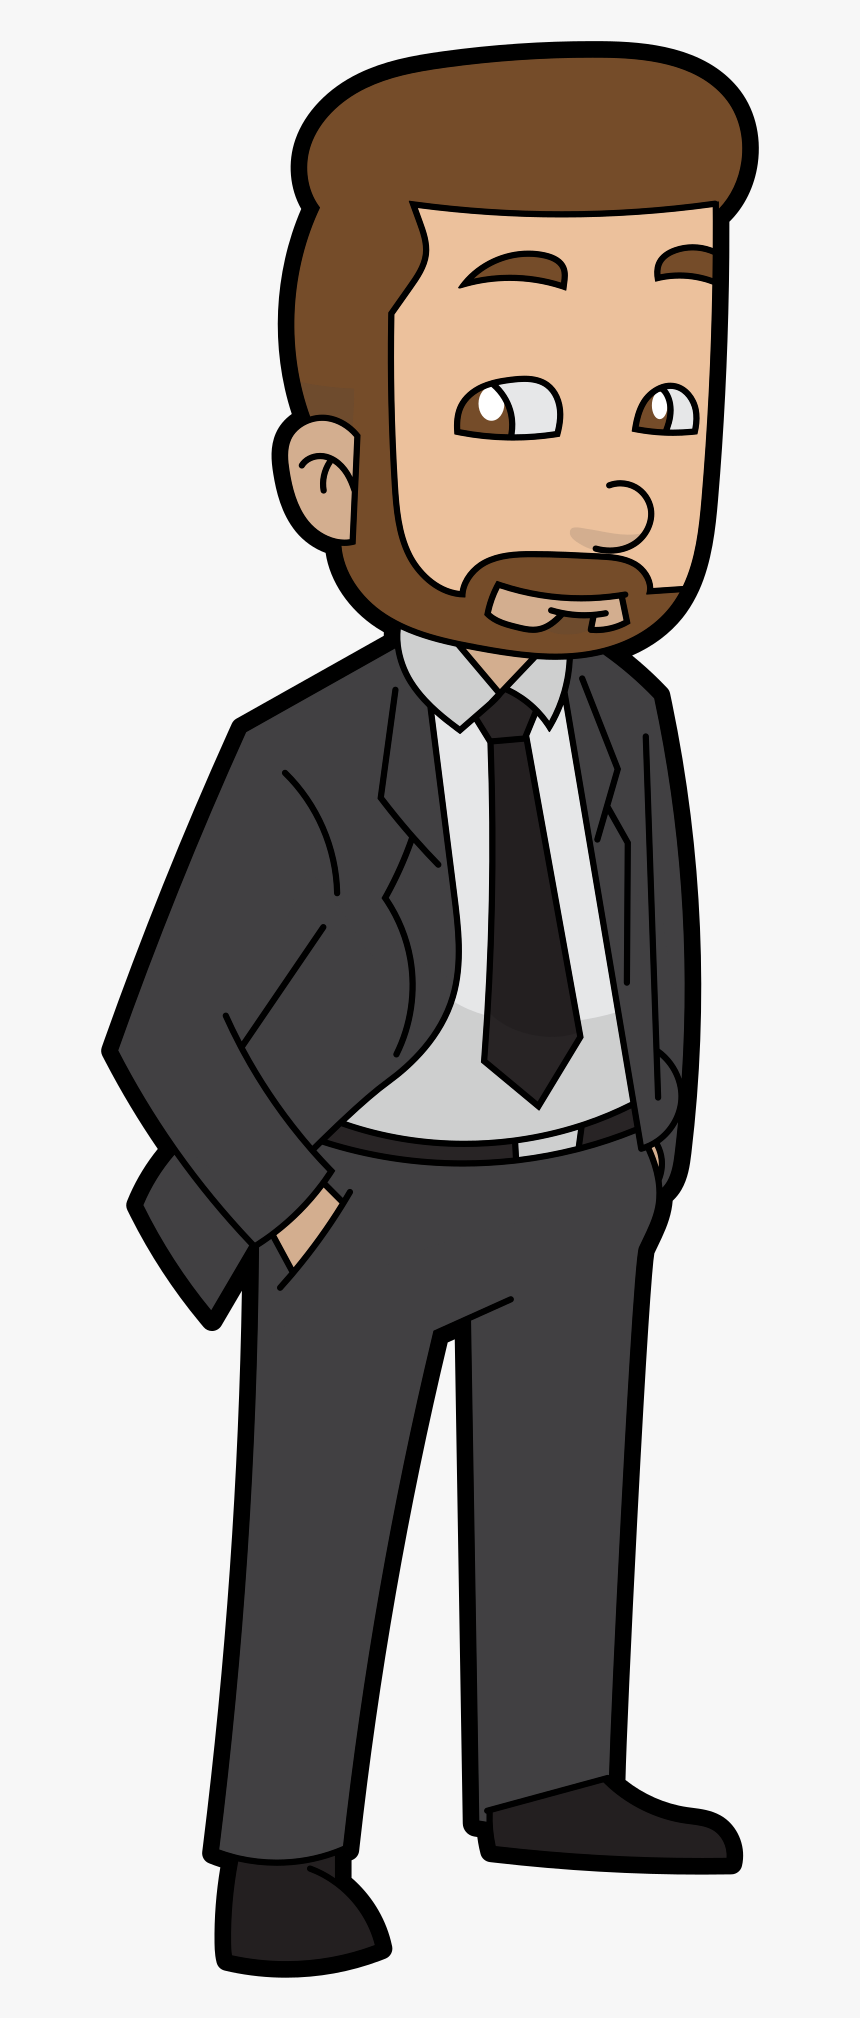 Cartoon Characters In Suits